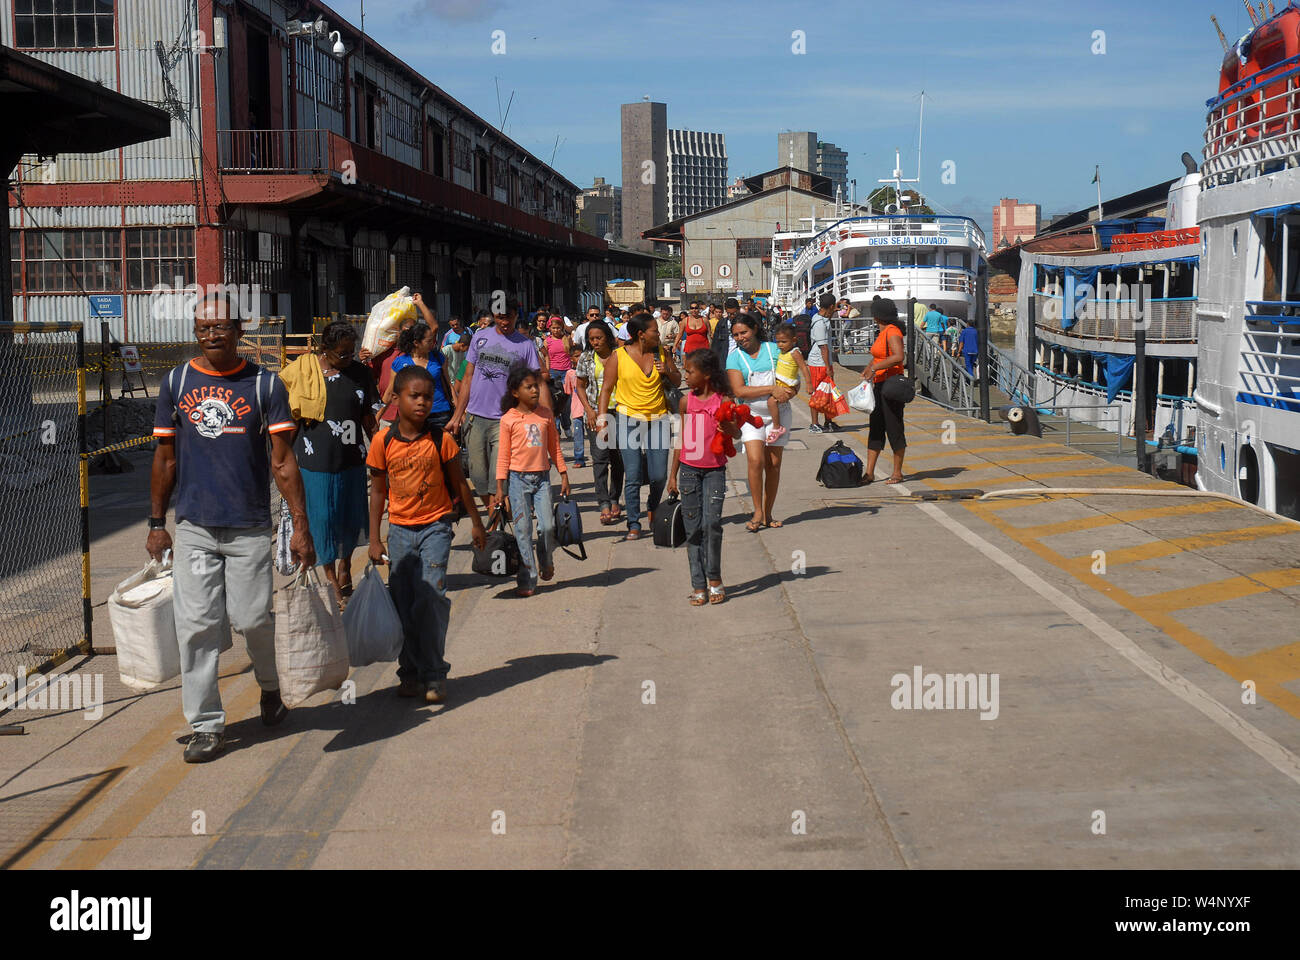 Belém, Brazil, October 16, 2006. People disembarking from regional boats in the port of Belem in the state of Pará. Stock Photo